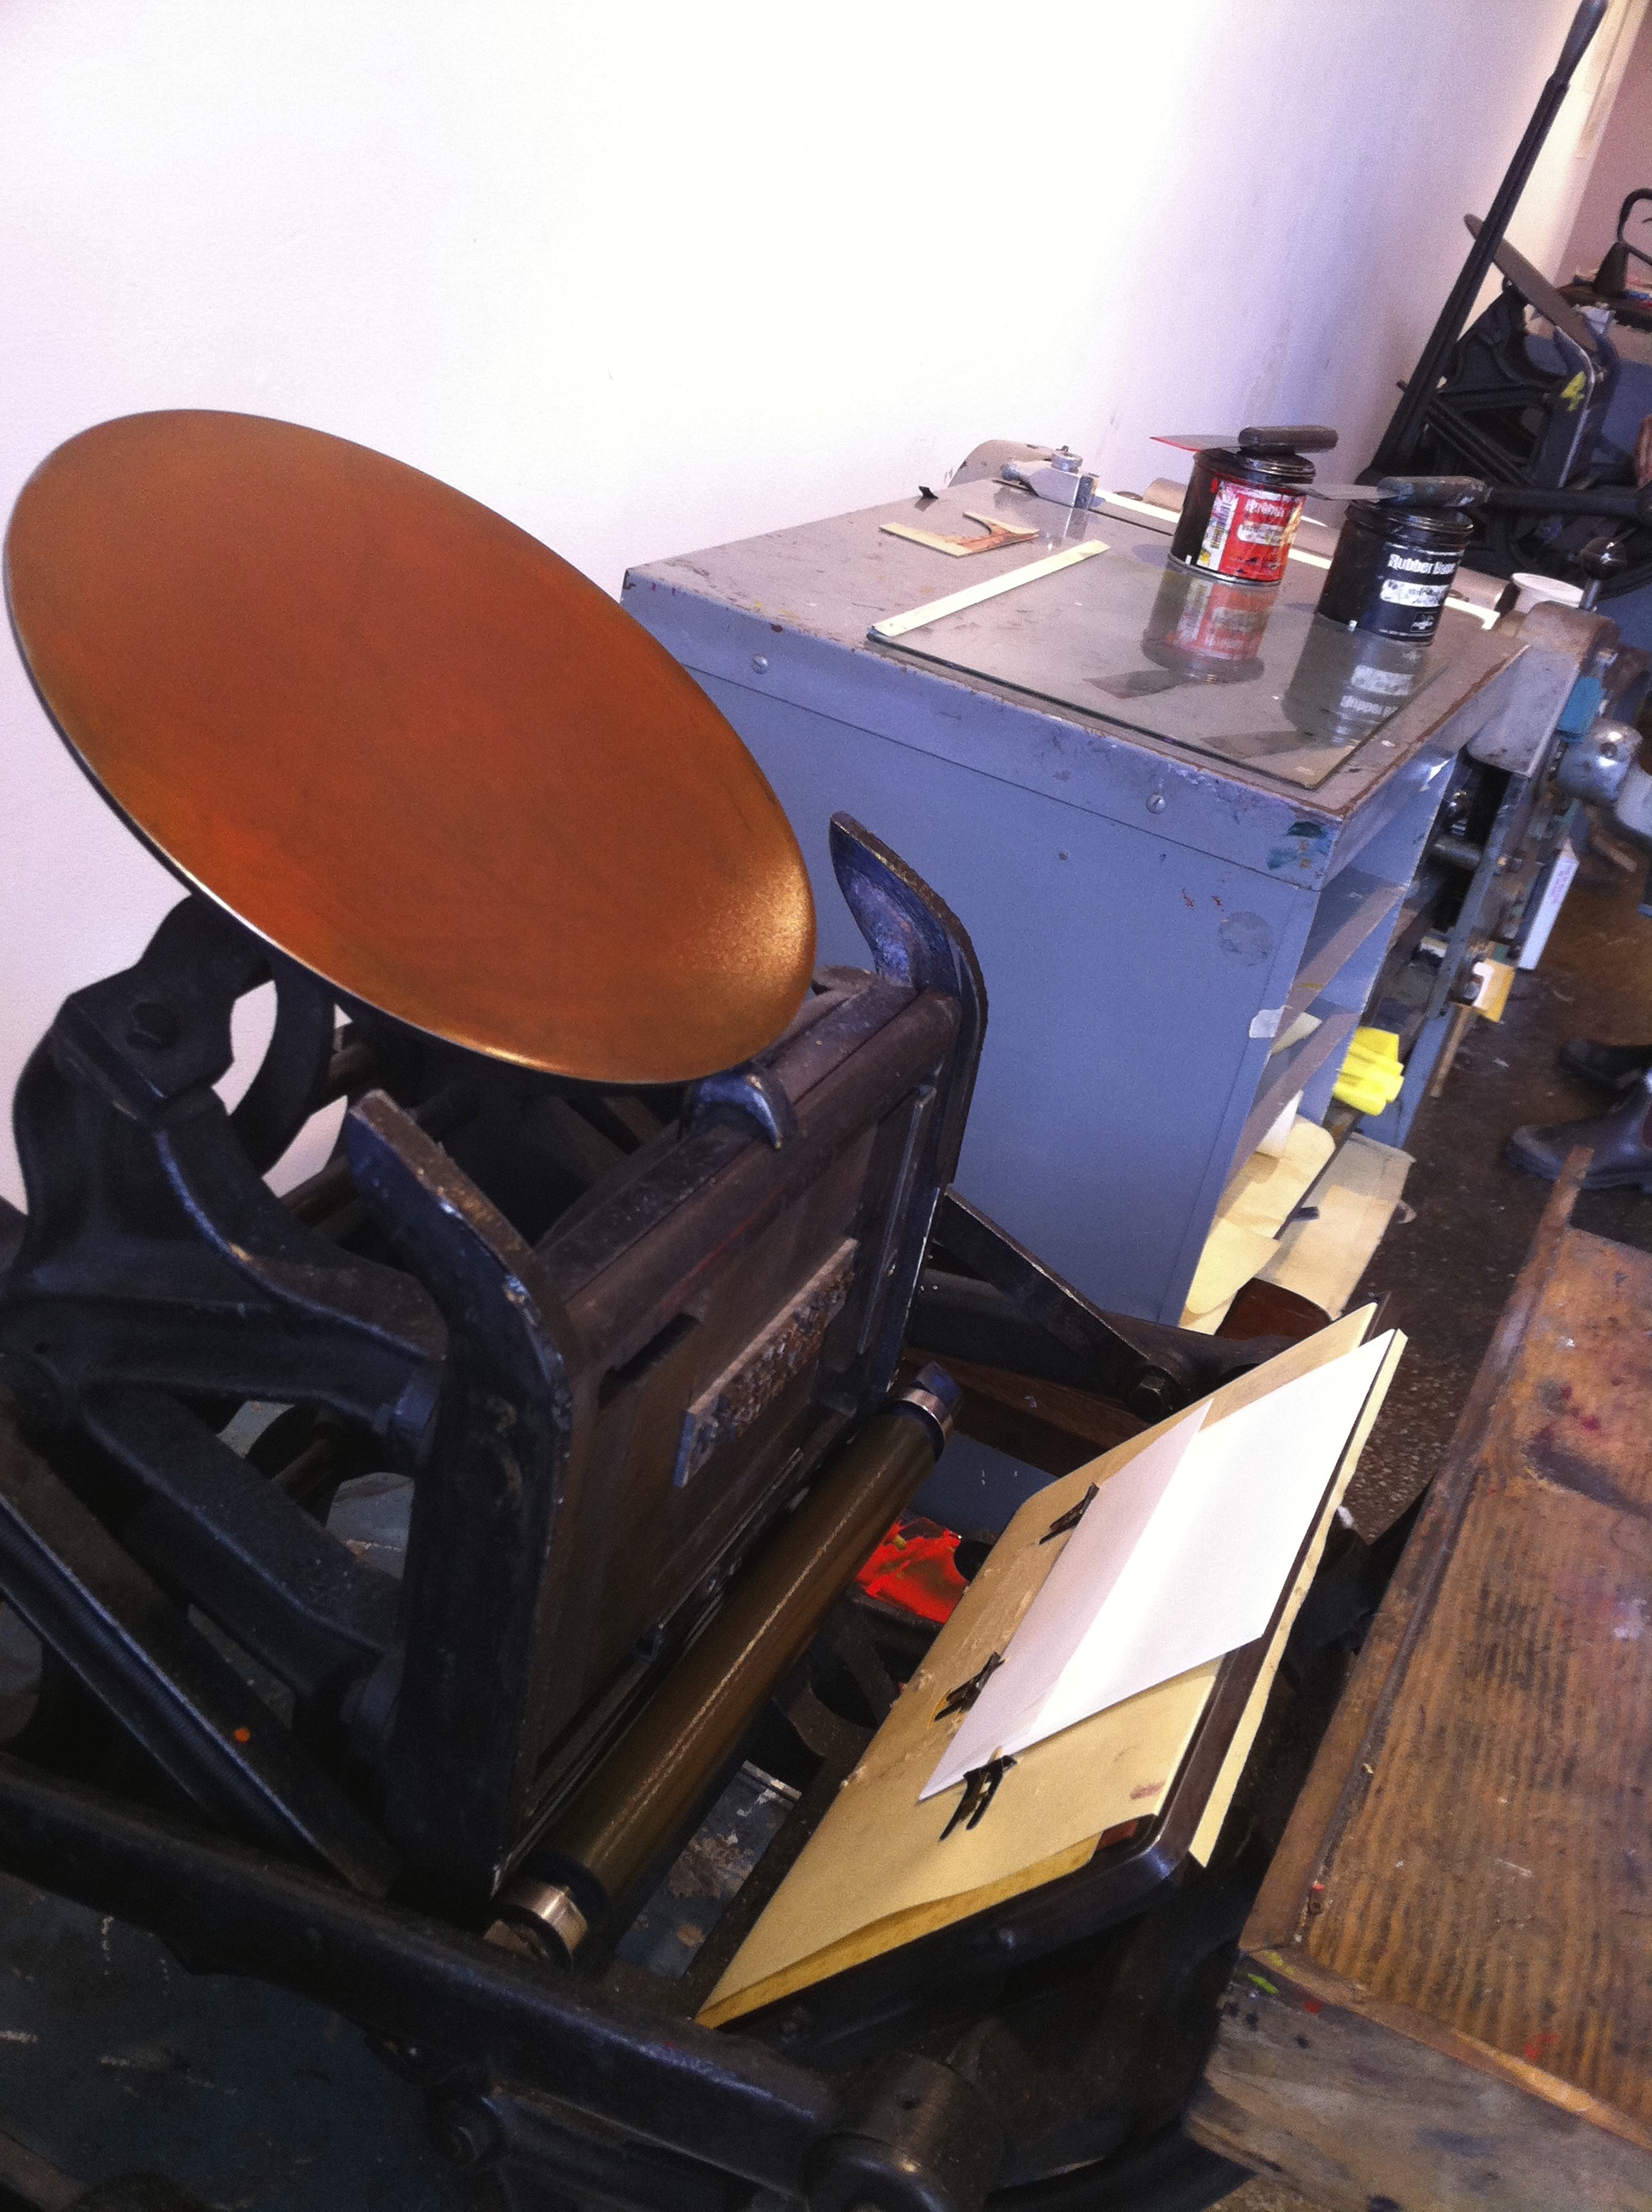  Here is the C&amp;P Pilot platen letterpress at The Arm letterpress collective in Williamsburg on which we have printed our business cards, as well as one-off broadsides, mini coinsides and other projects. 